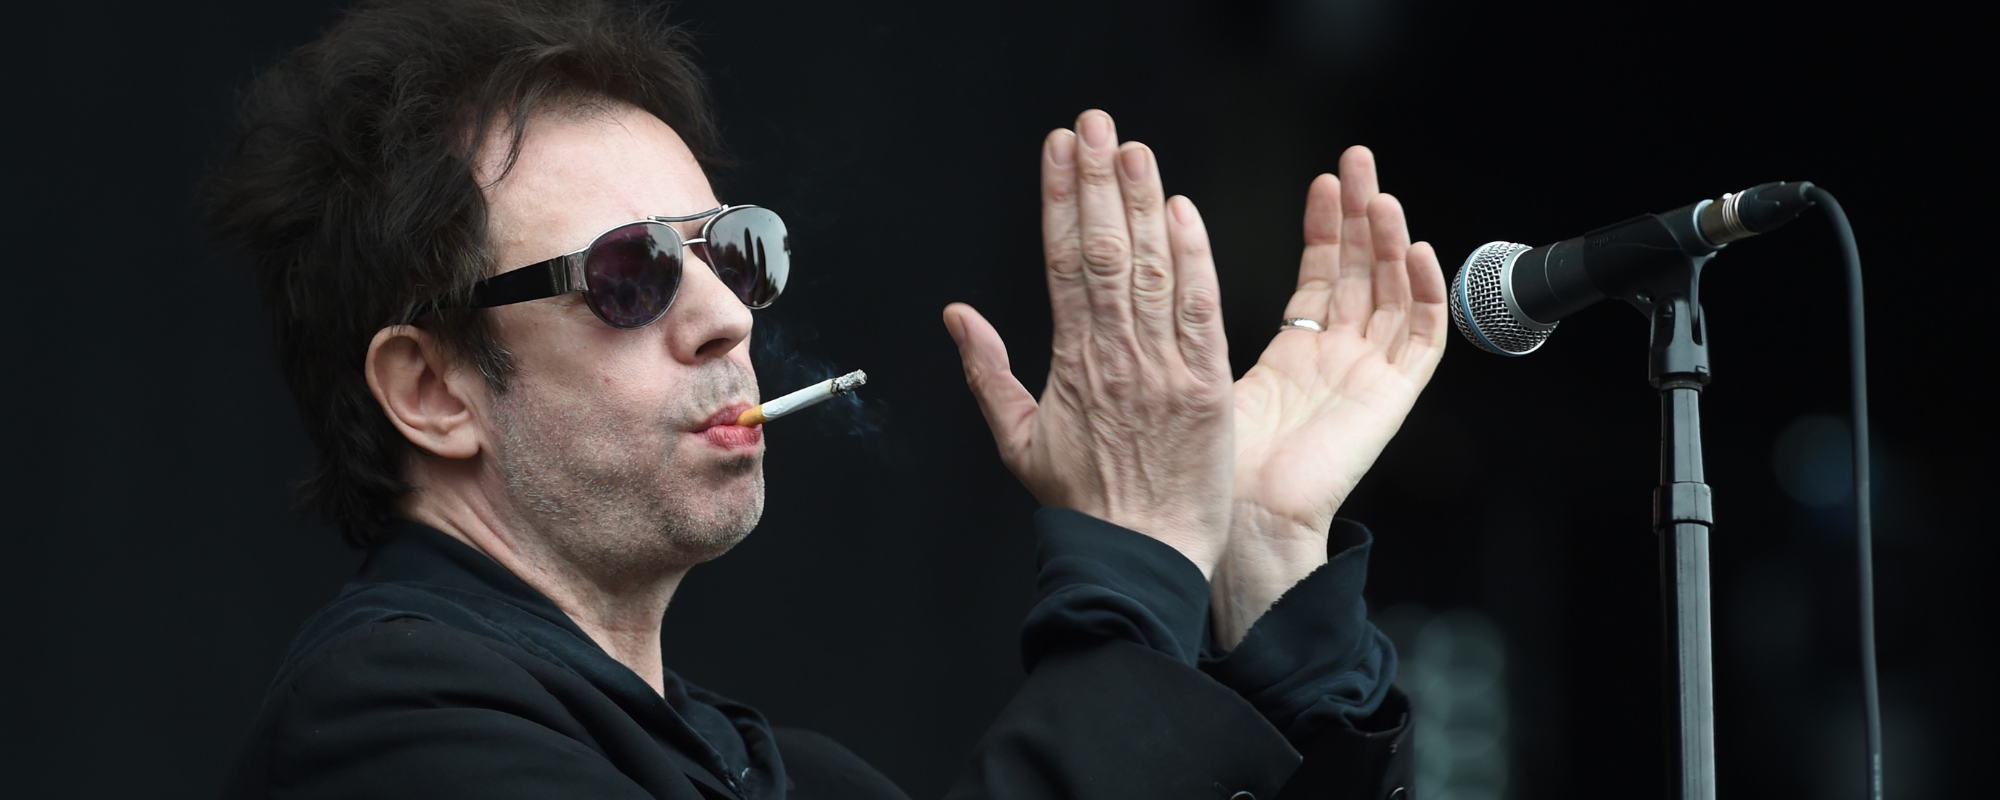 5 Must-Listen-to Songs That Epitomize Echo & the Bunnymen’s Gloom-and-Doom Mood Poetry